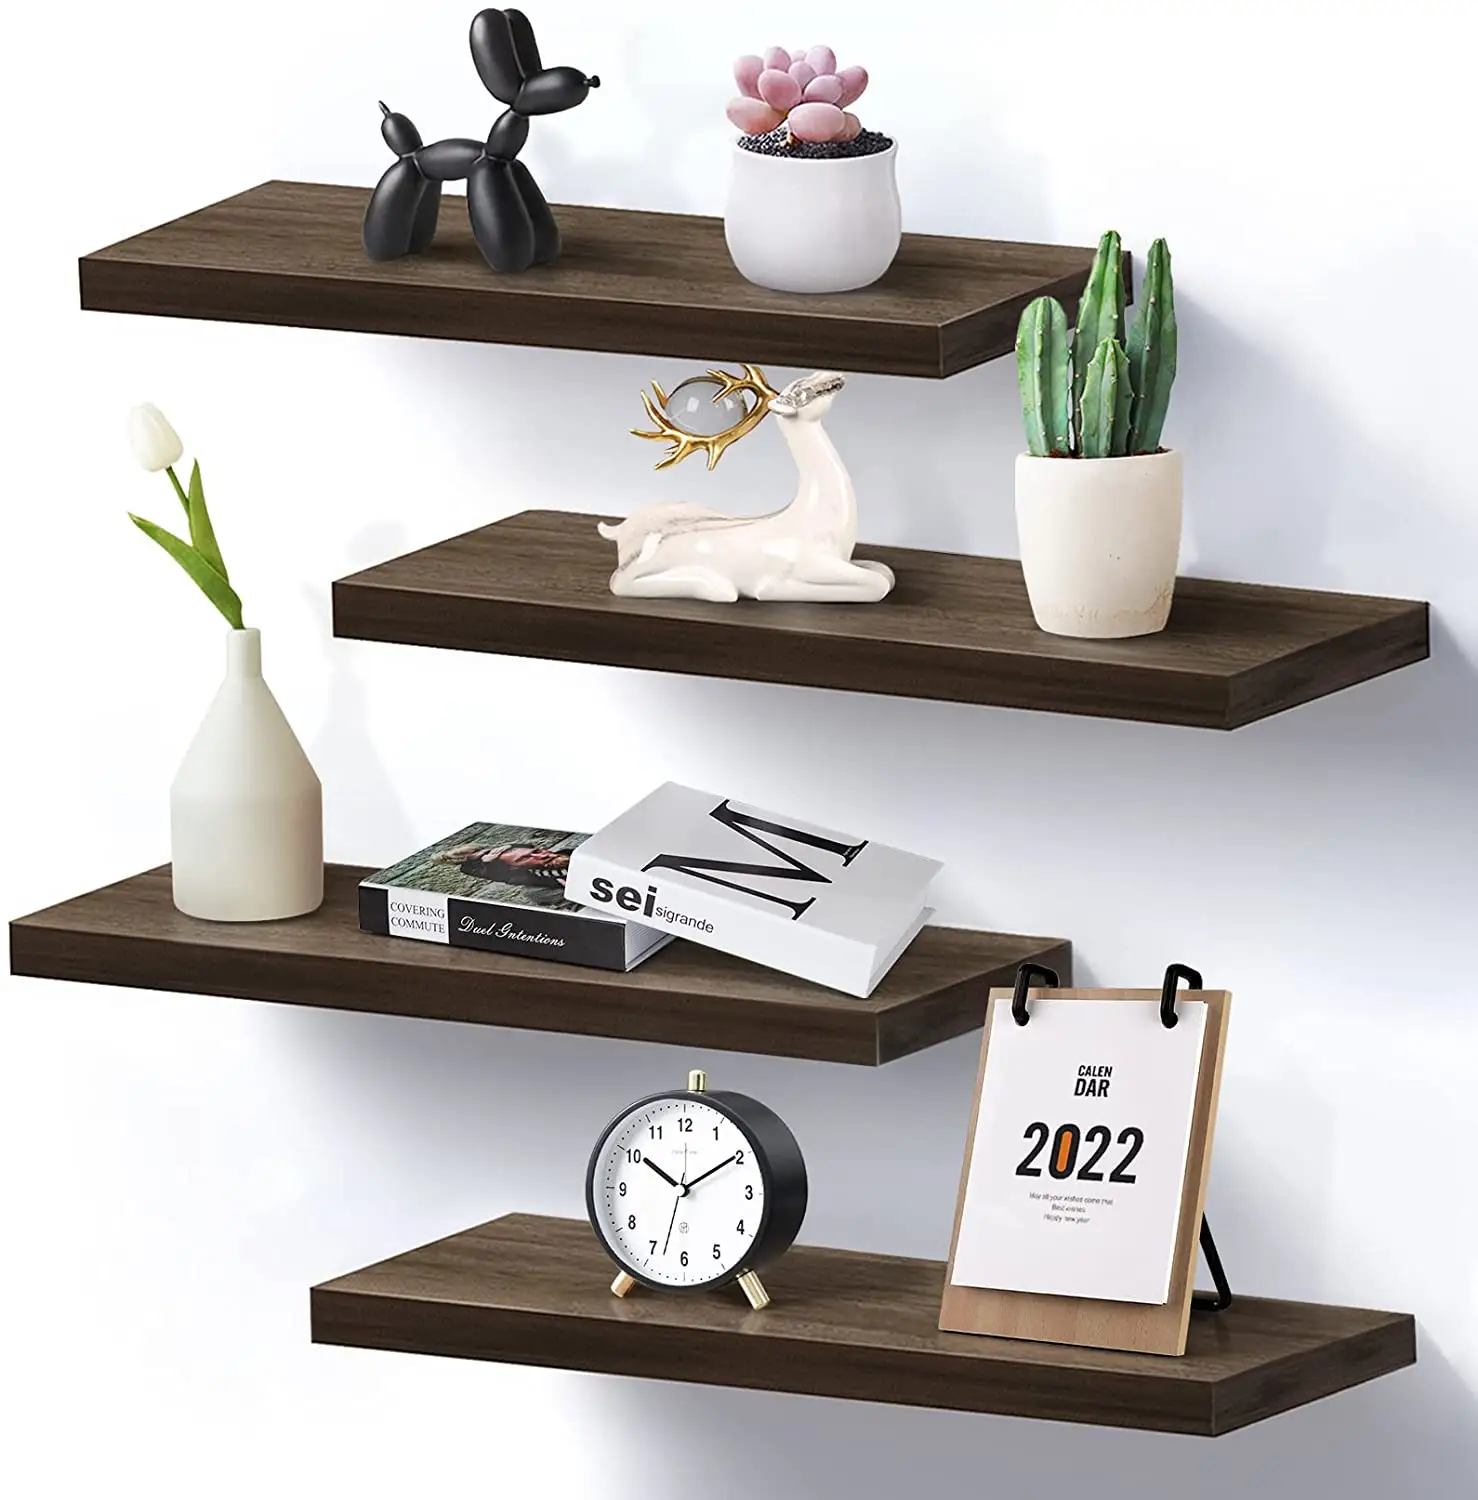 Hot Selling White Shelf for Wall, Set of4 Wall Mount Wood Floating Decorative Plant Display Storage Long Shelves for Home